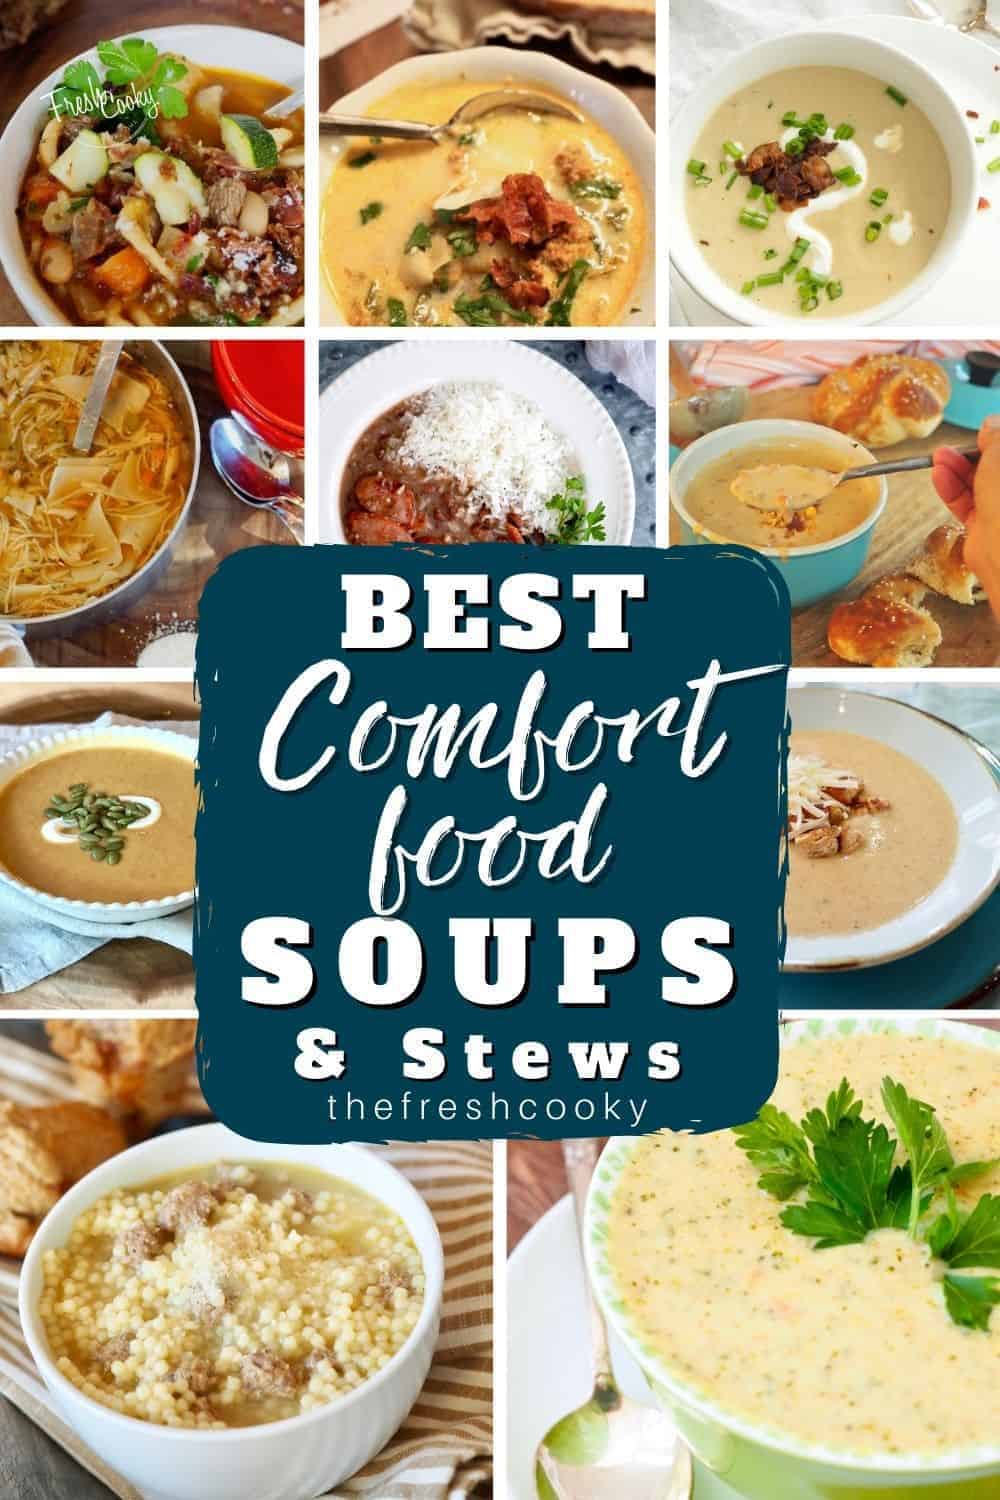 Best Comfort Food Soups & Stews Long Pin with 11 soup and stews images.